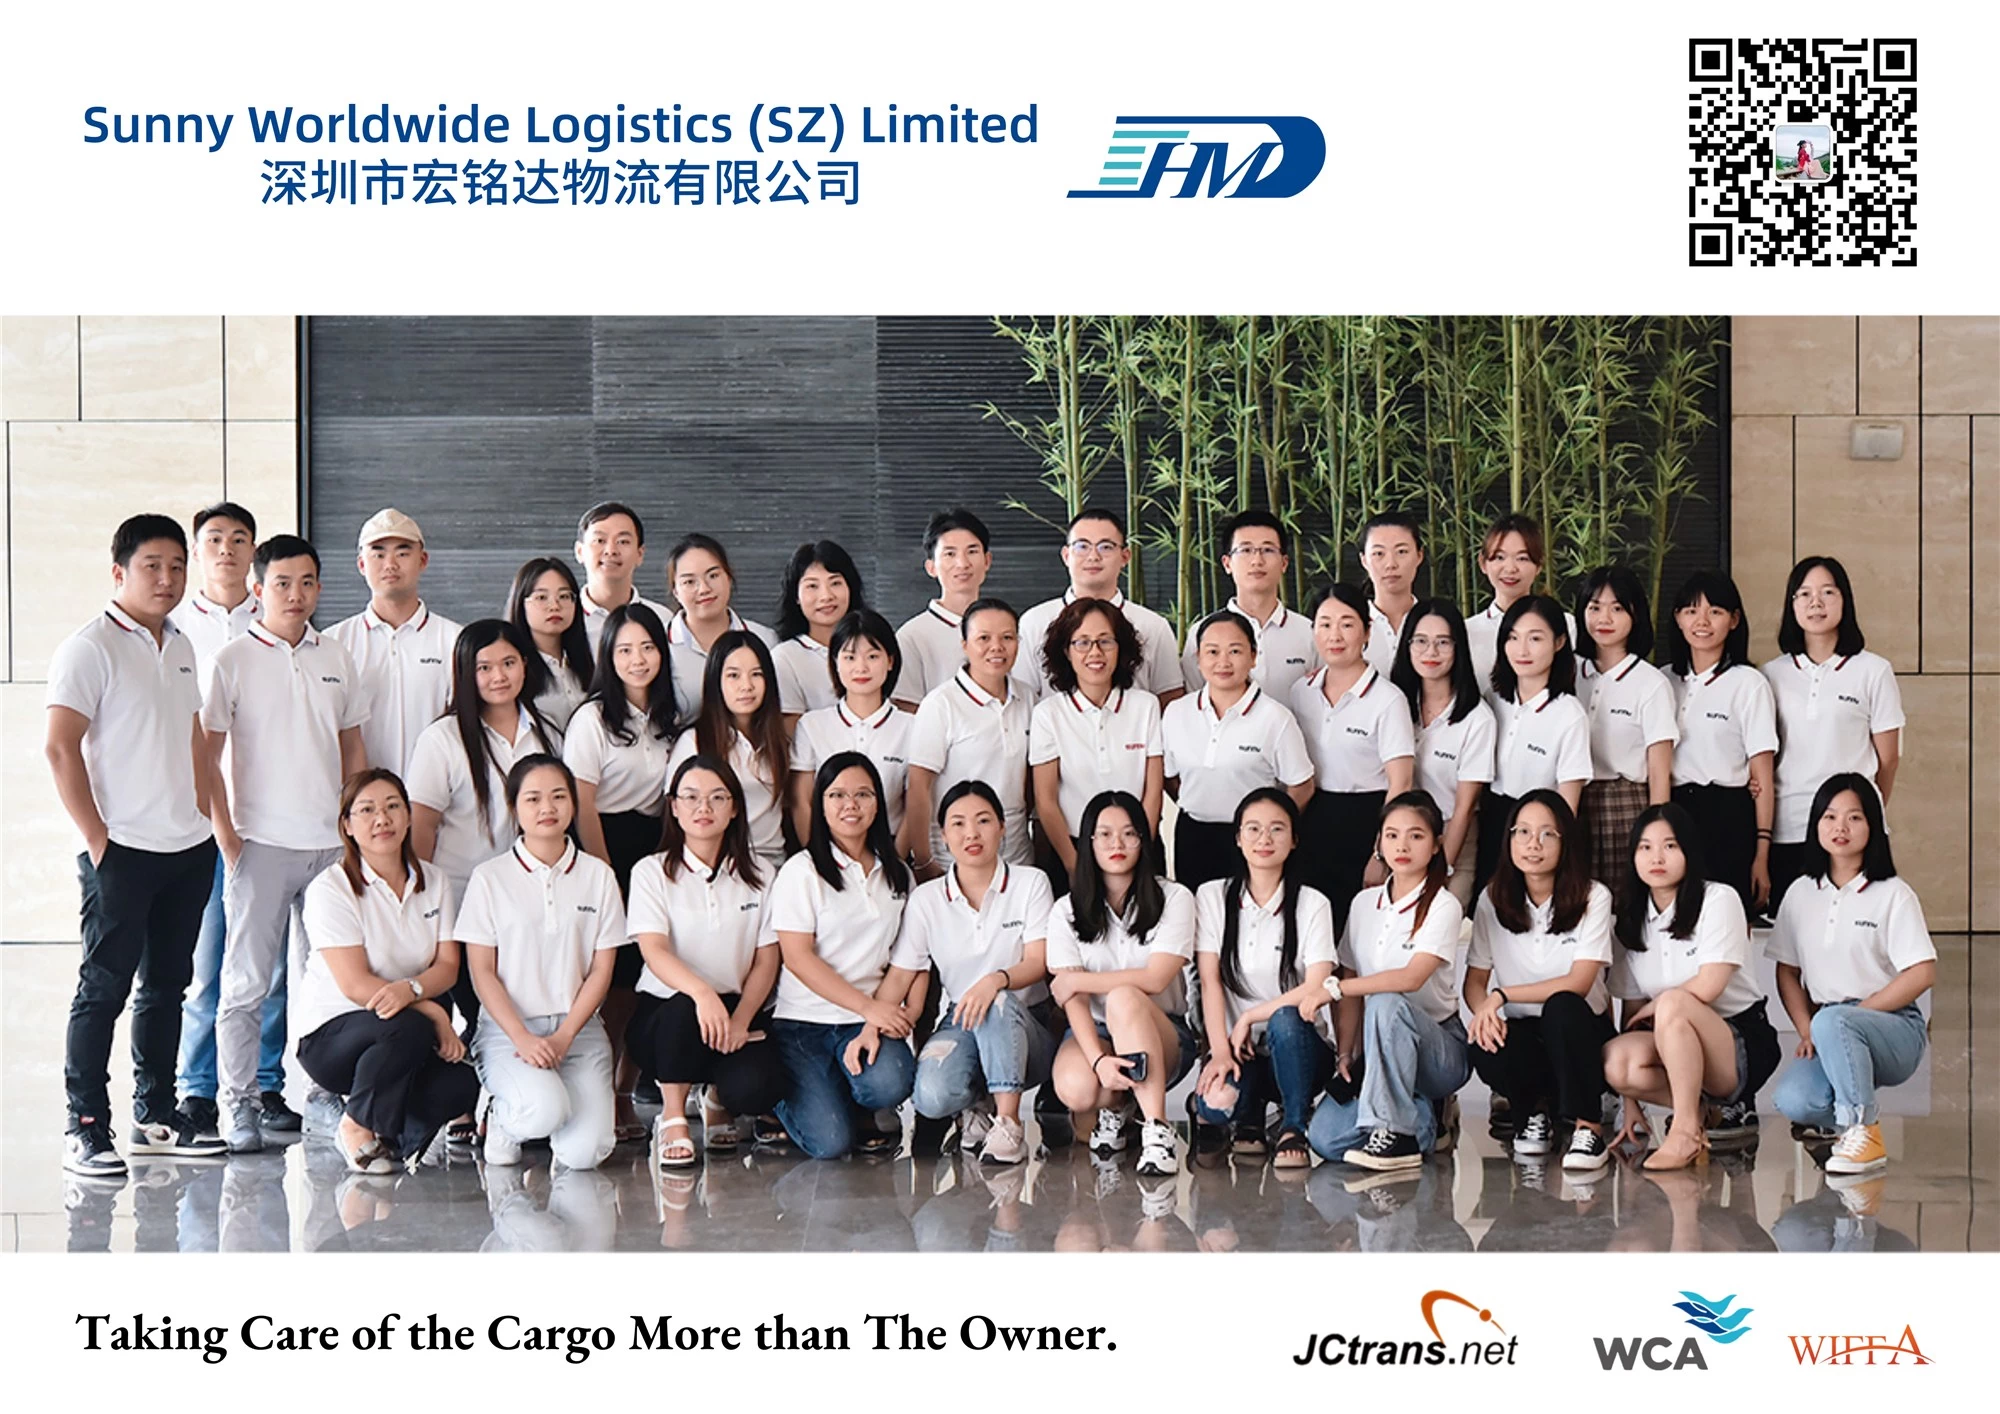 Sea freight door to door service from China to Canada including customs clearance